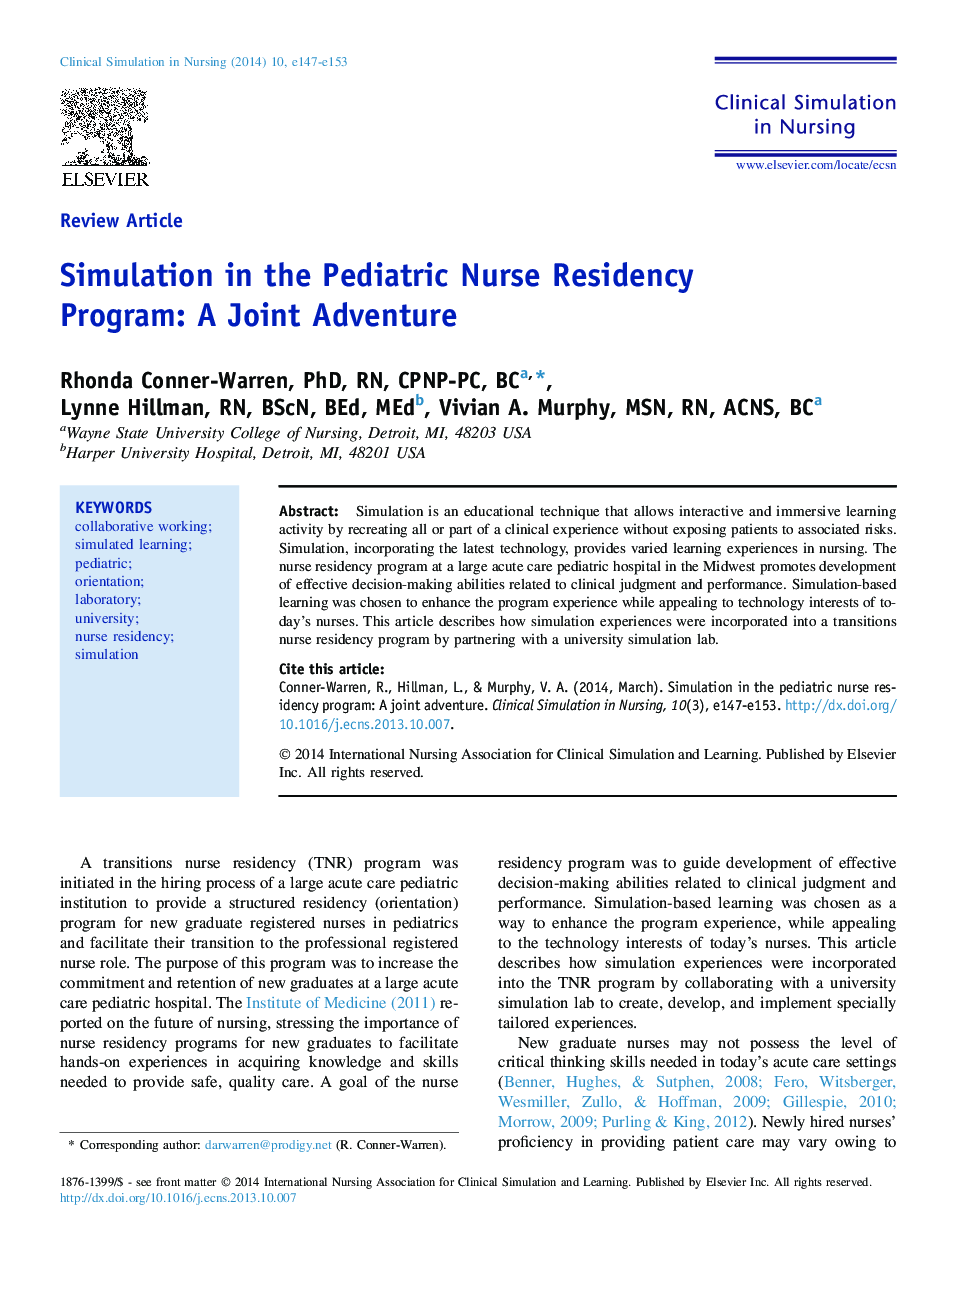 Simulation in the Pediatric Nurse Residency Program: A Joint Adventure